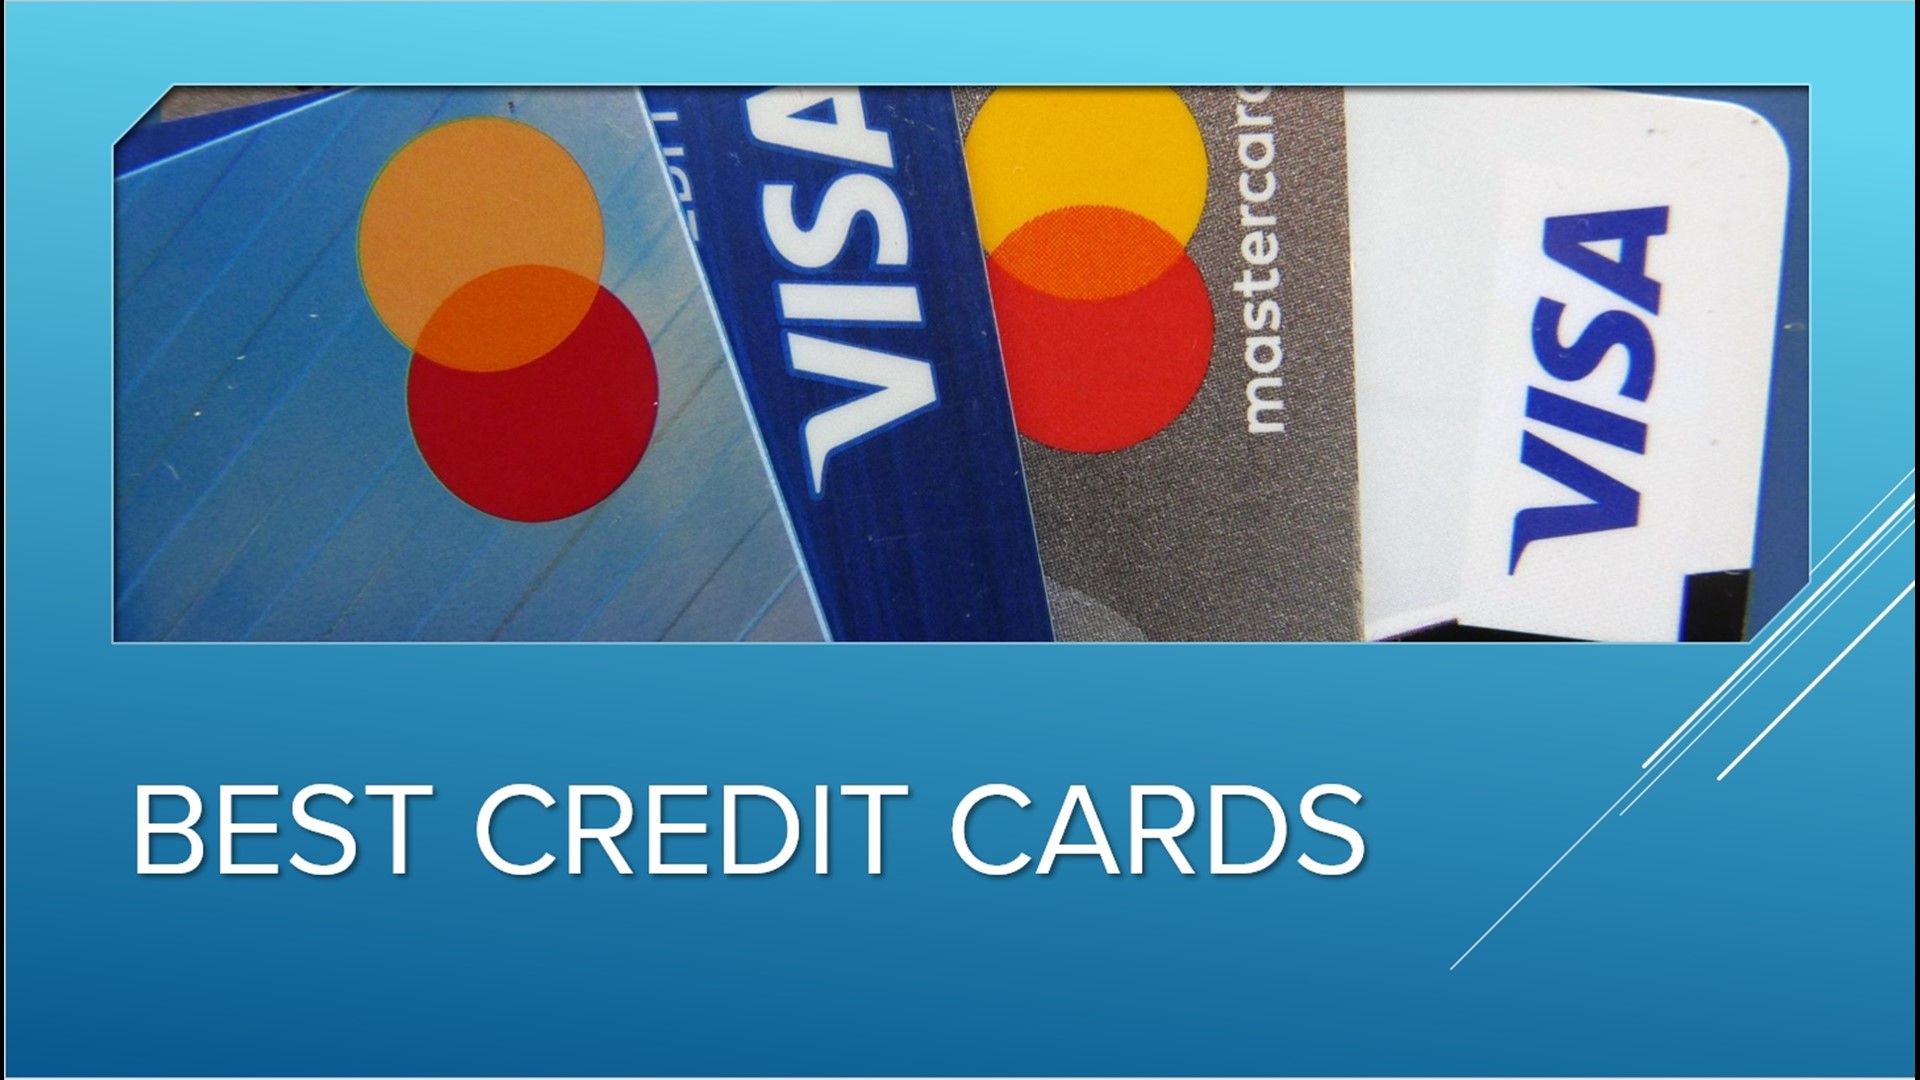 Here's a look at the best credit cards of August 2022 from Forbes Advisor.